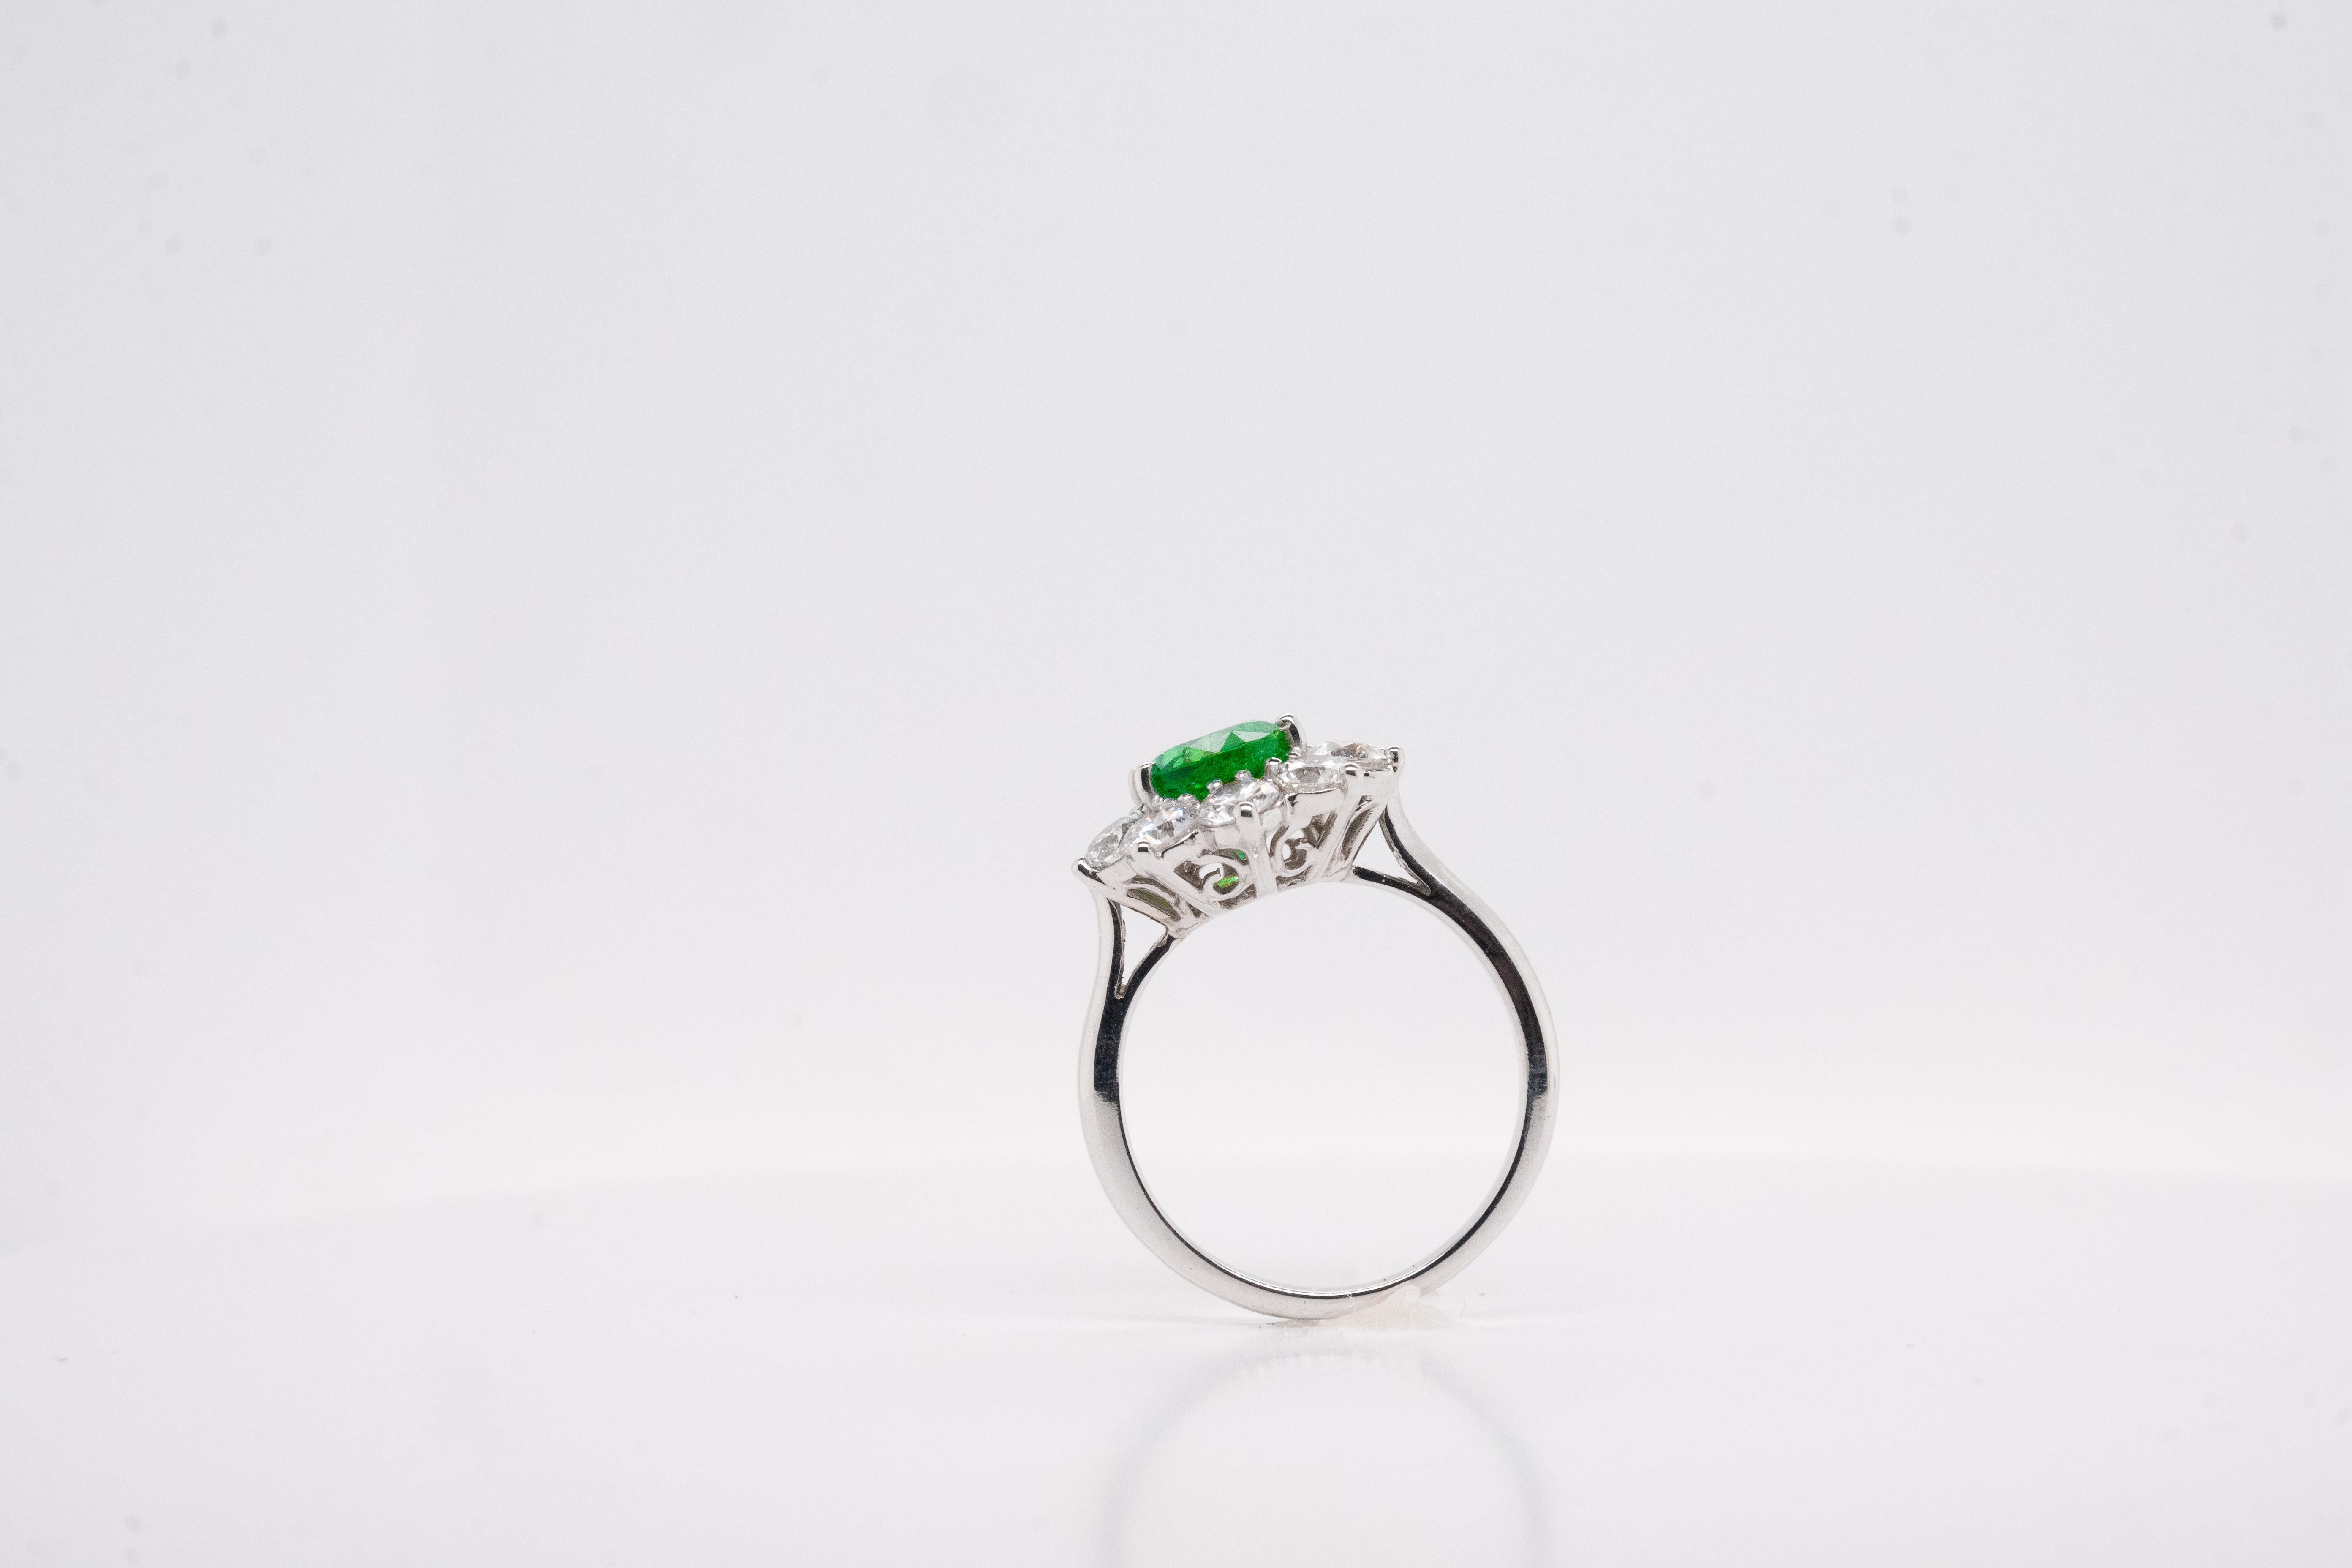 Discover elegance incarnate with this certified emerald ring, in daisy or princess shape, in 18-carat white gold, a jewel that marries craftsmanship with the splendor of precious stones.

At the center of the ring, a majestic 2.230-carat certified